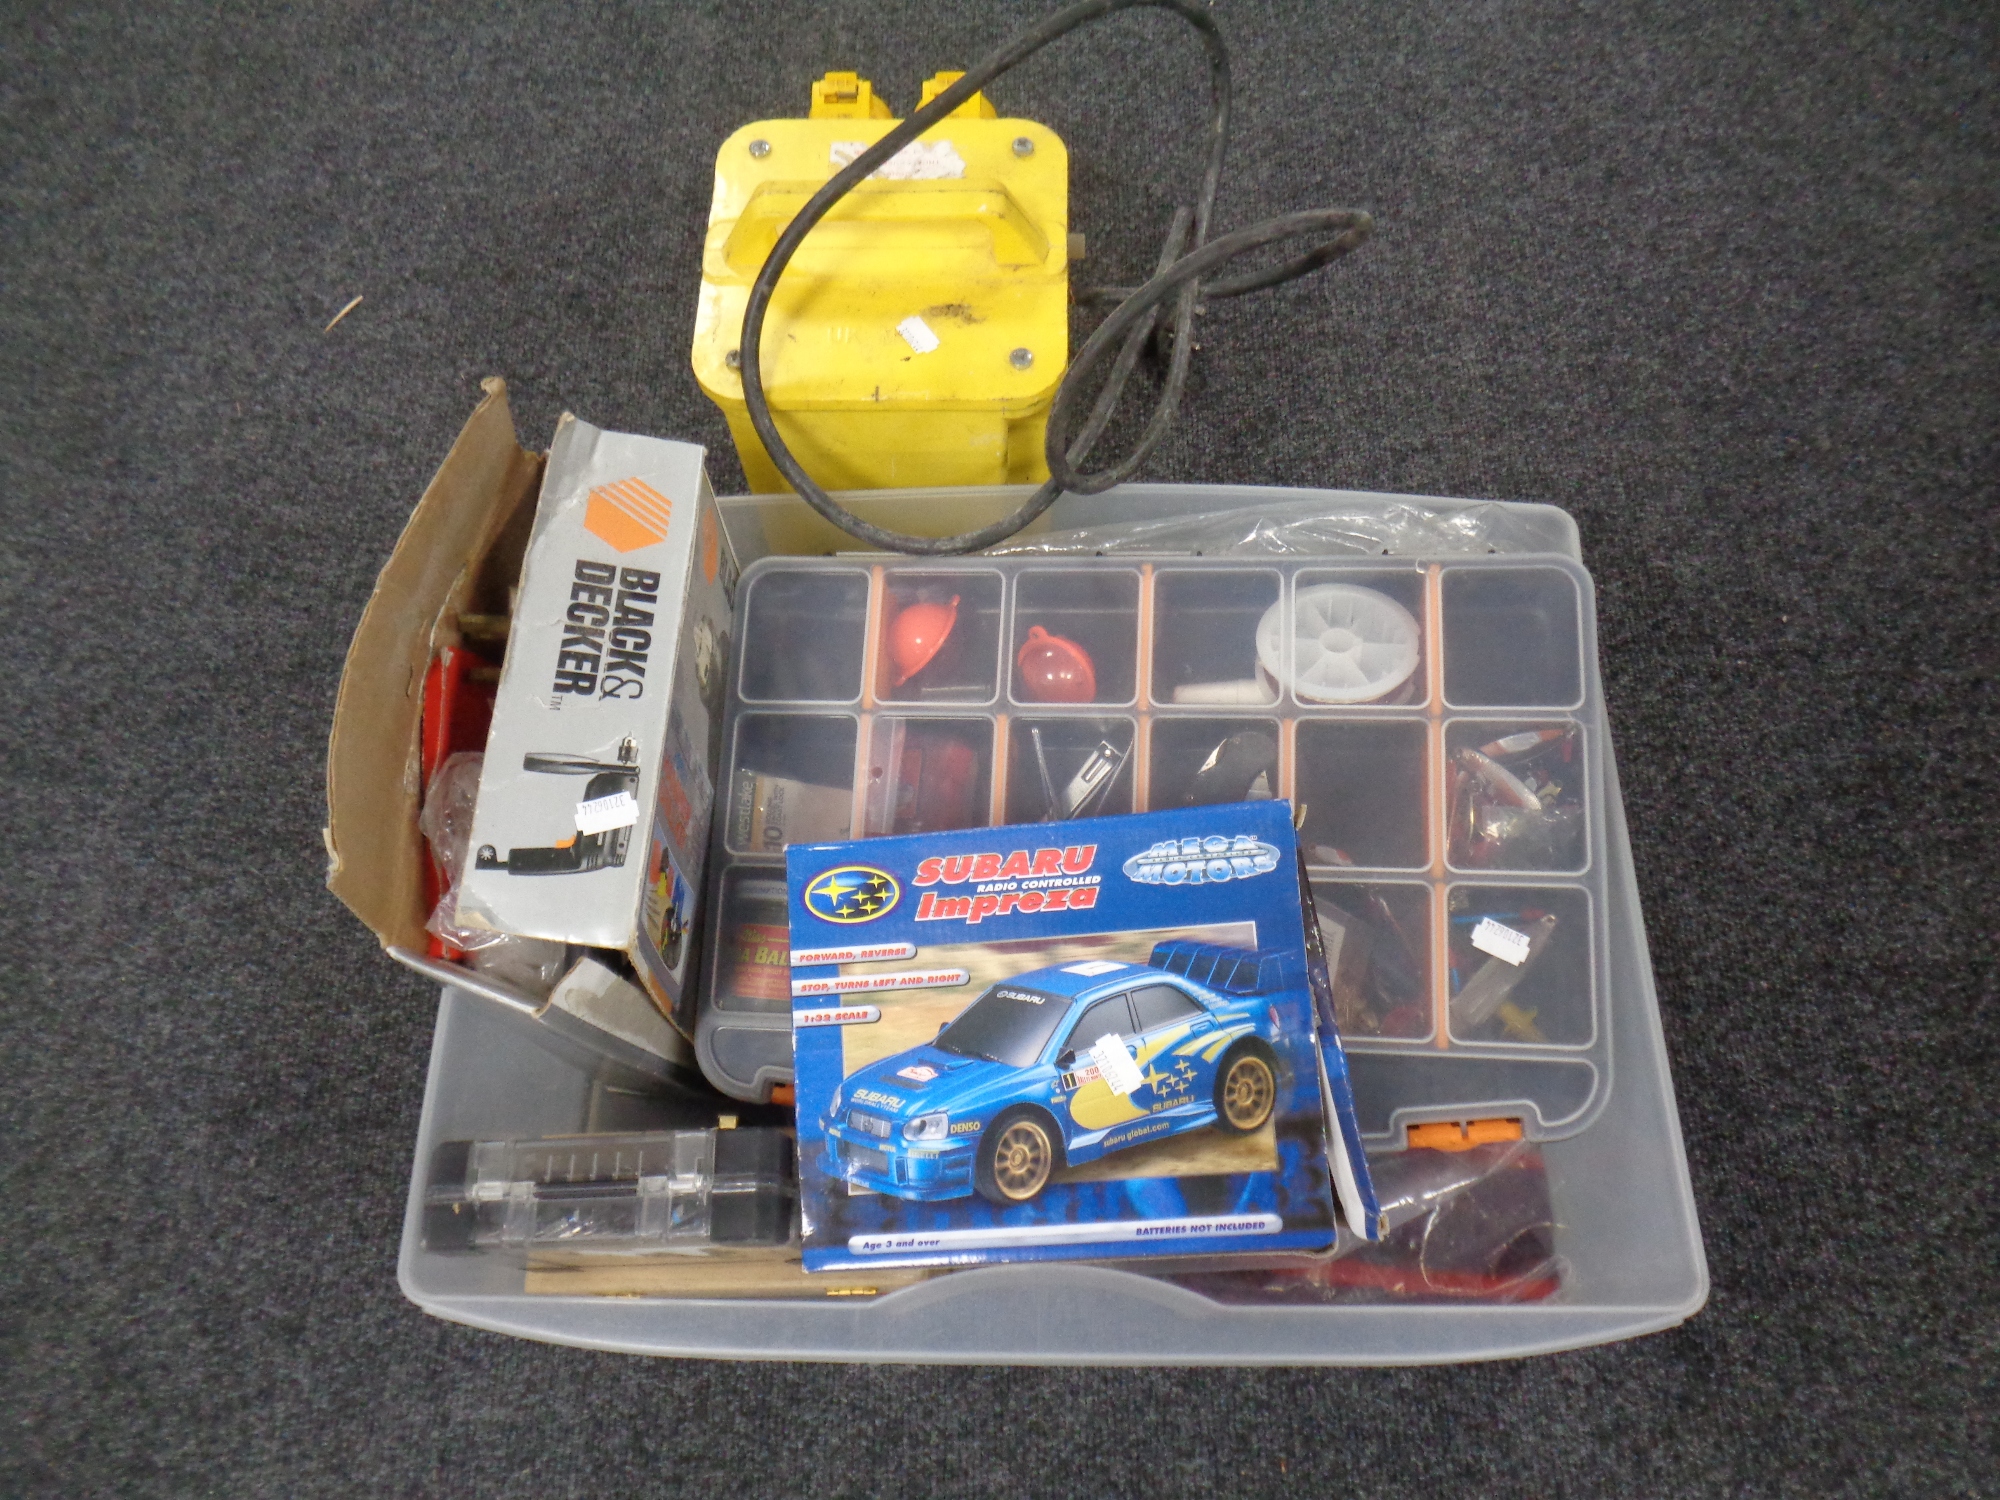 A box containing fishing lures, a drill bit set, Black and Decker electric drill,